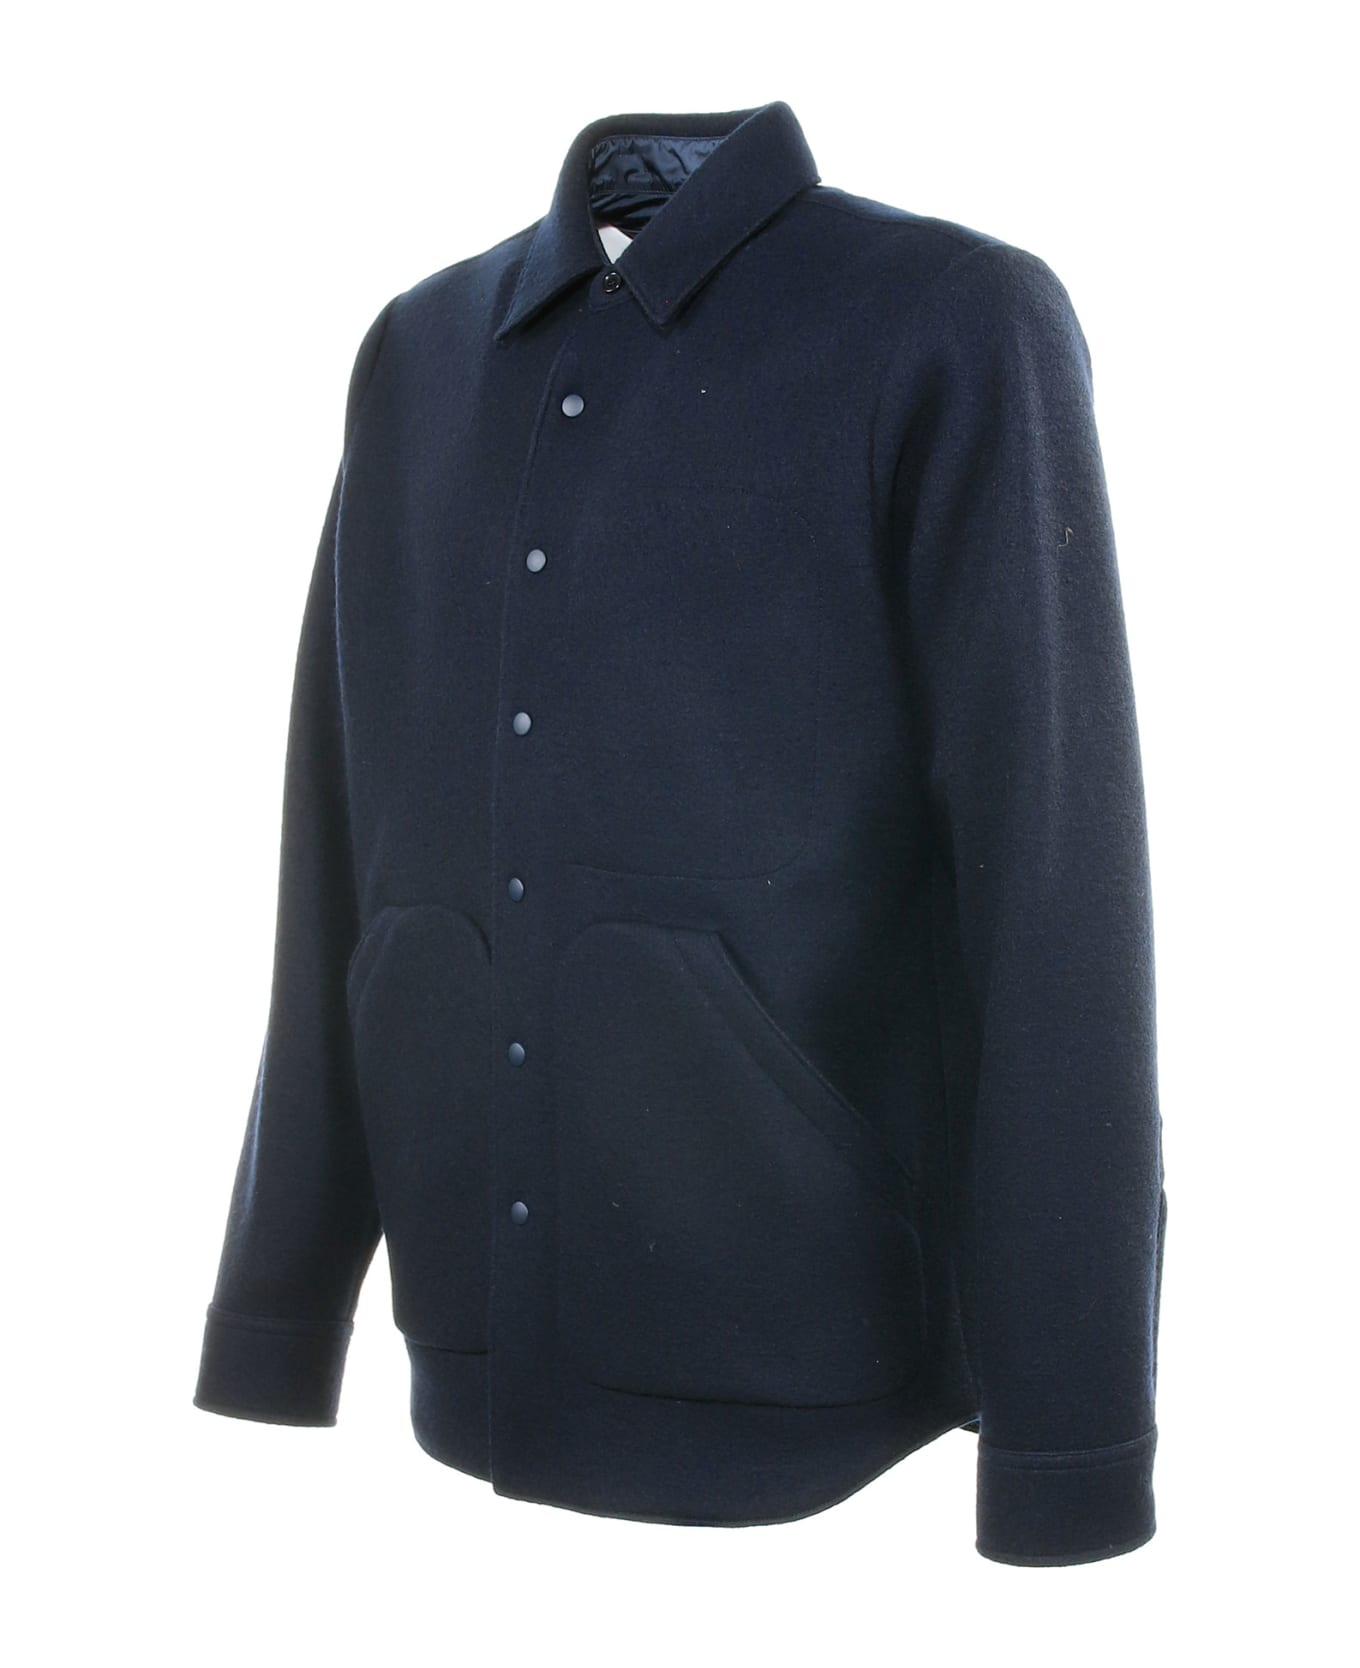 Aspesi Jacket With Buttons - NAVY